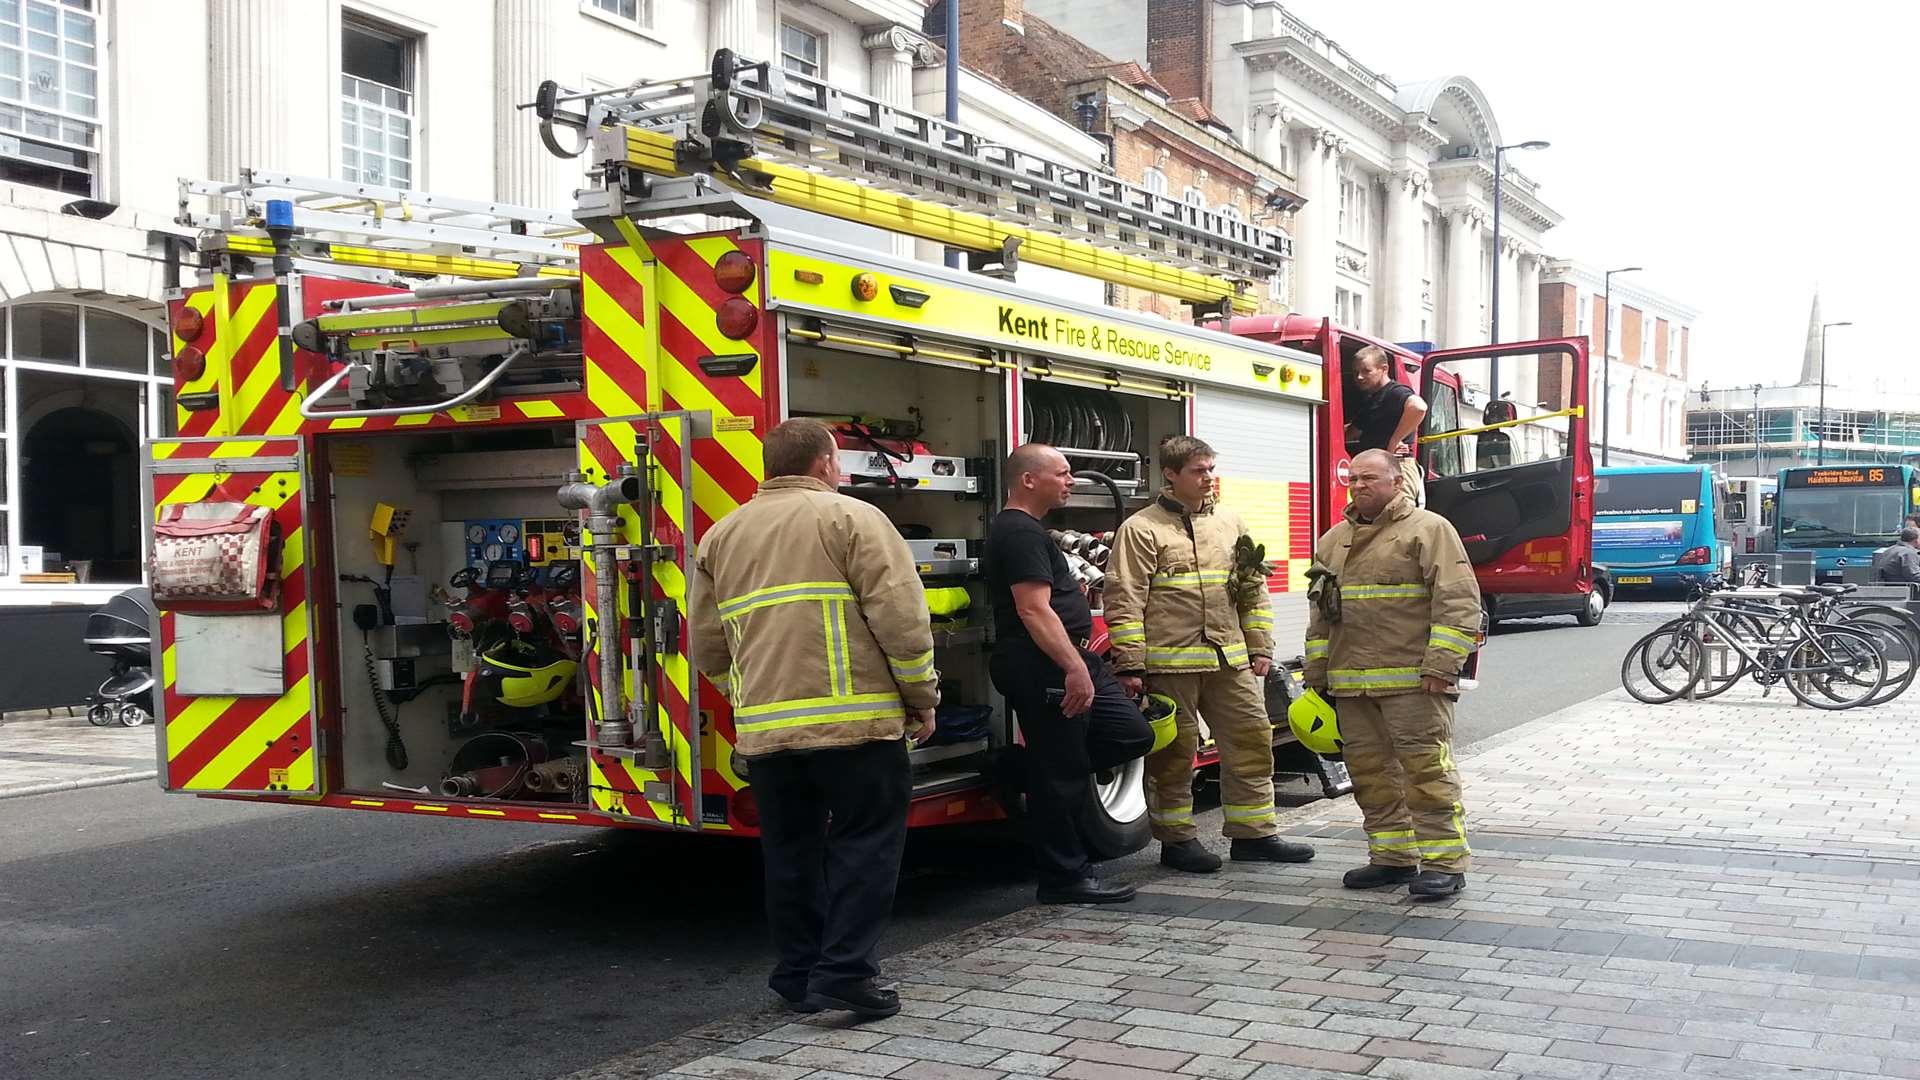 Fire fiighters outside the Town Hall